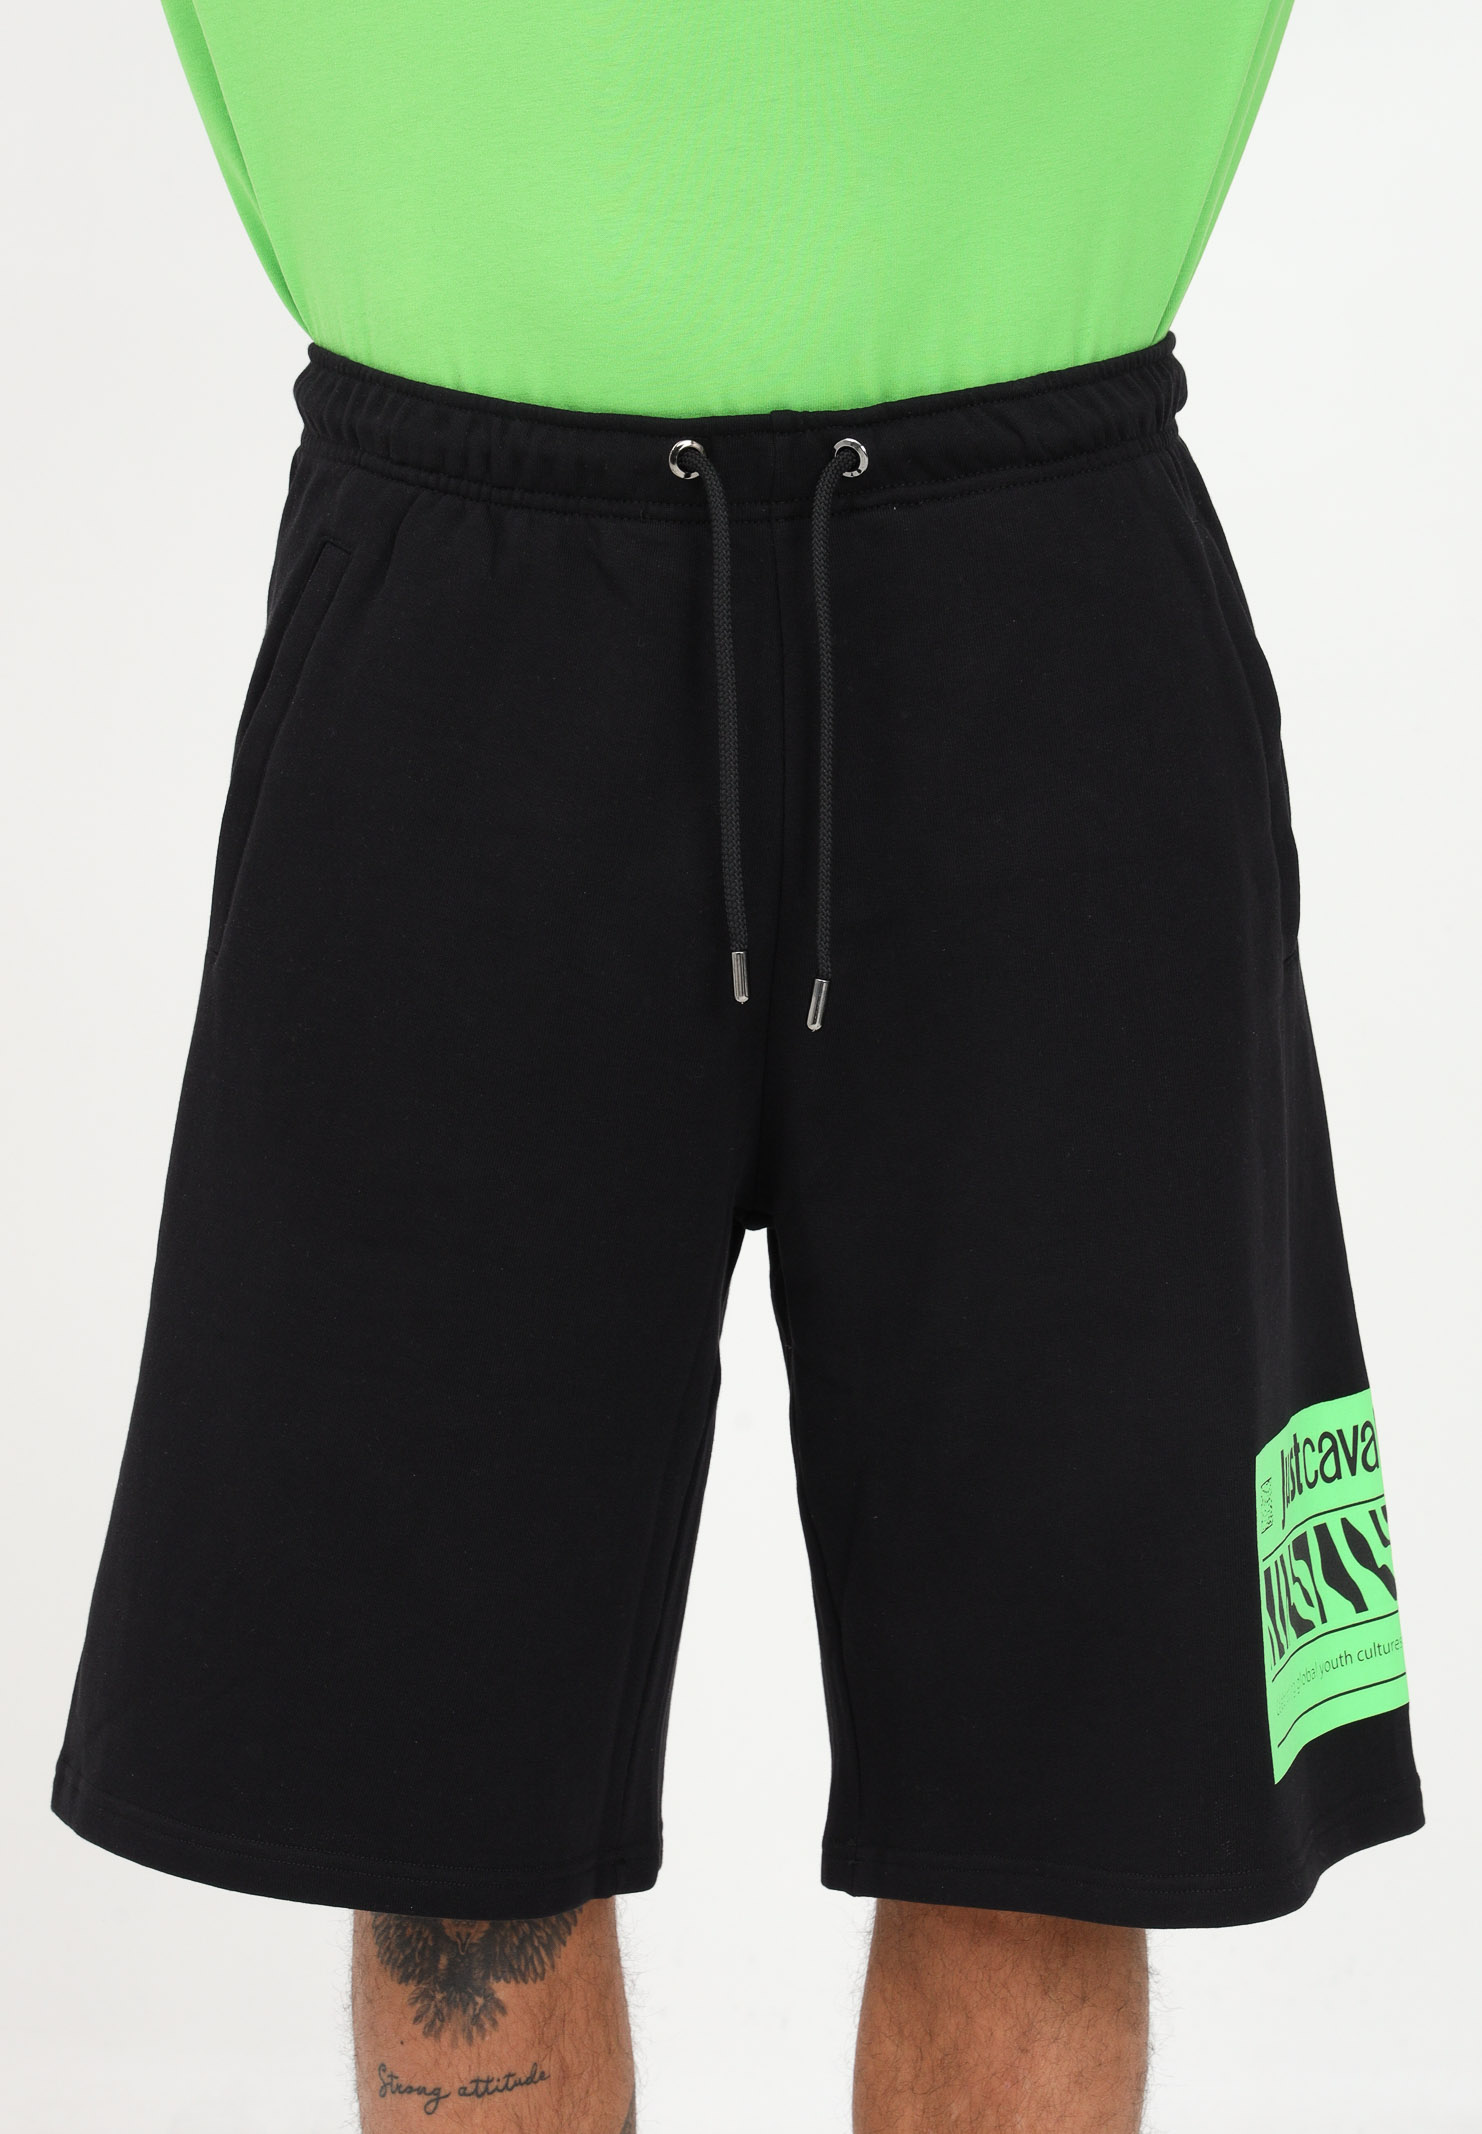 Men's black casual shorts with logo print - JUST -